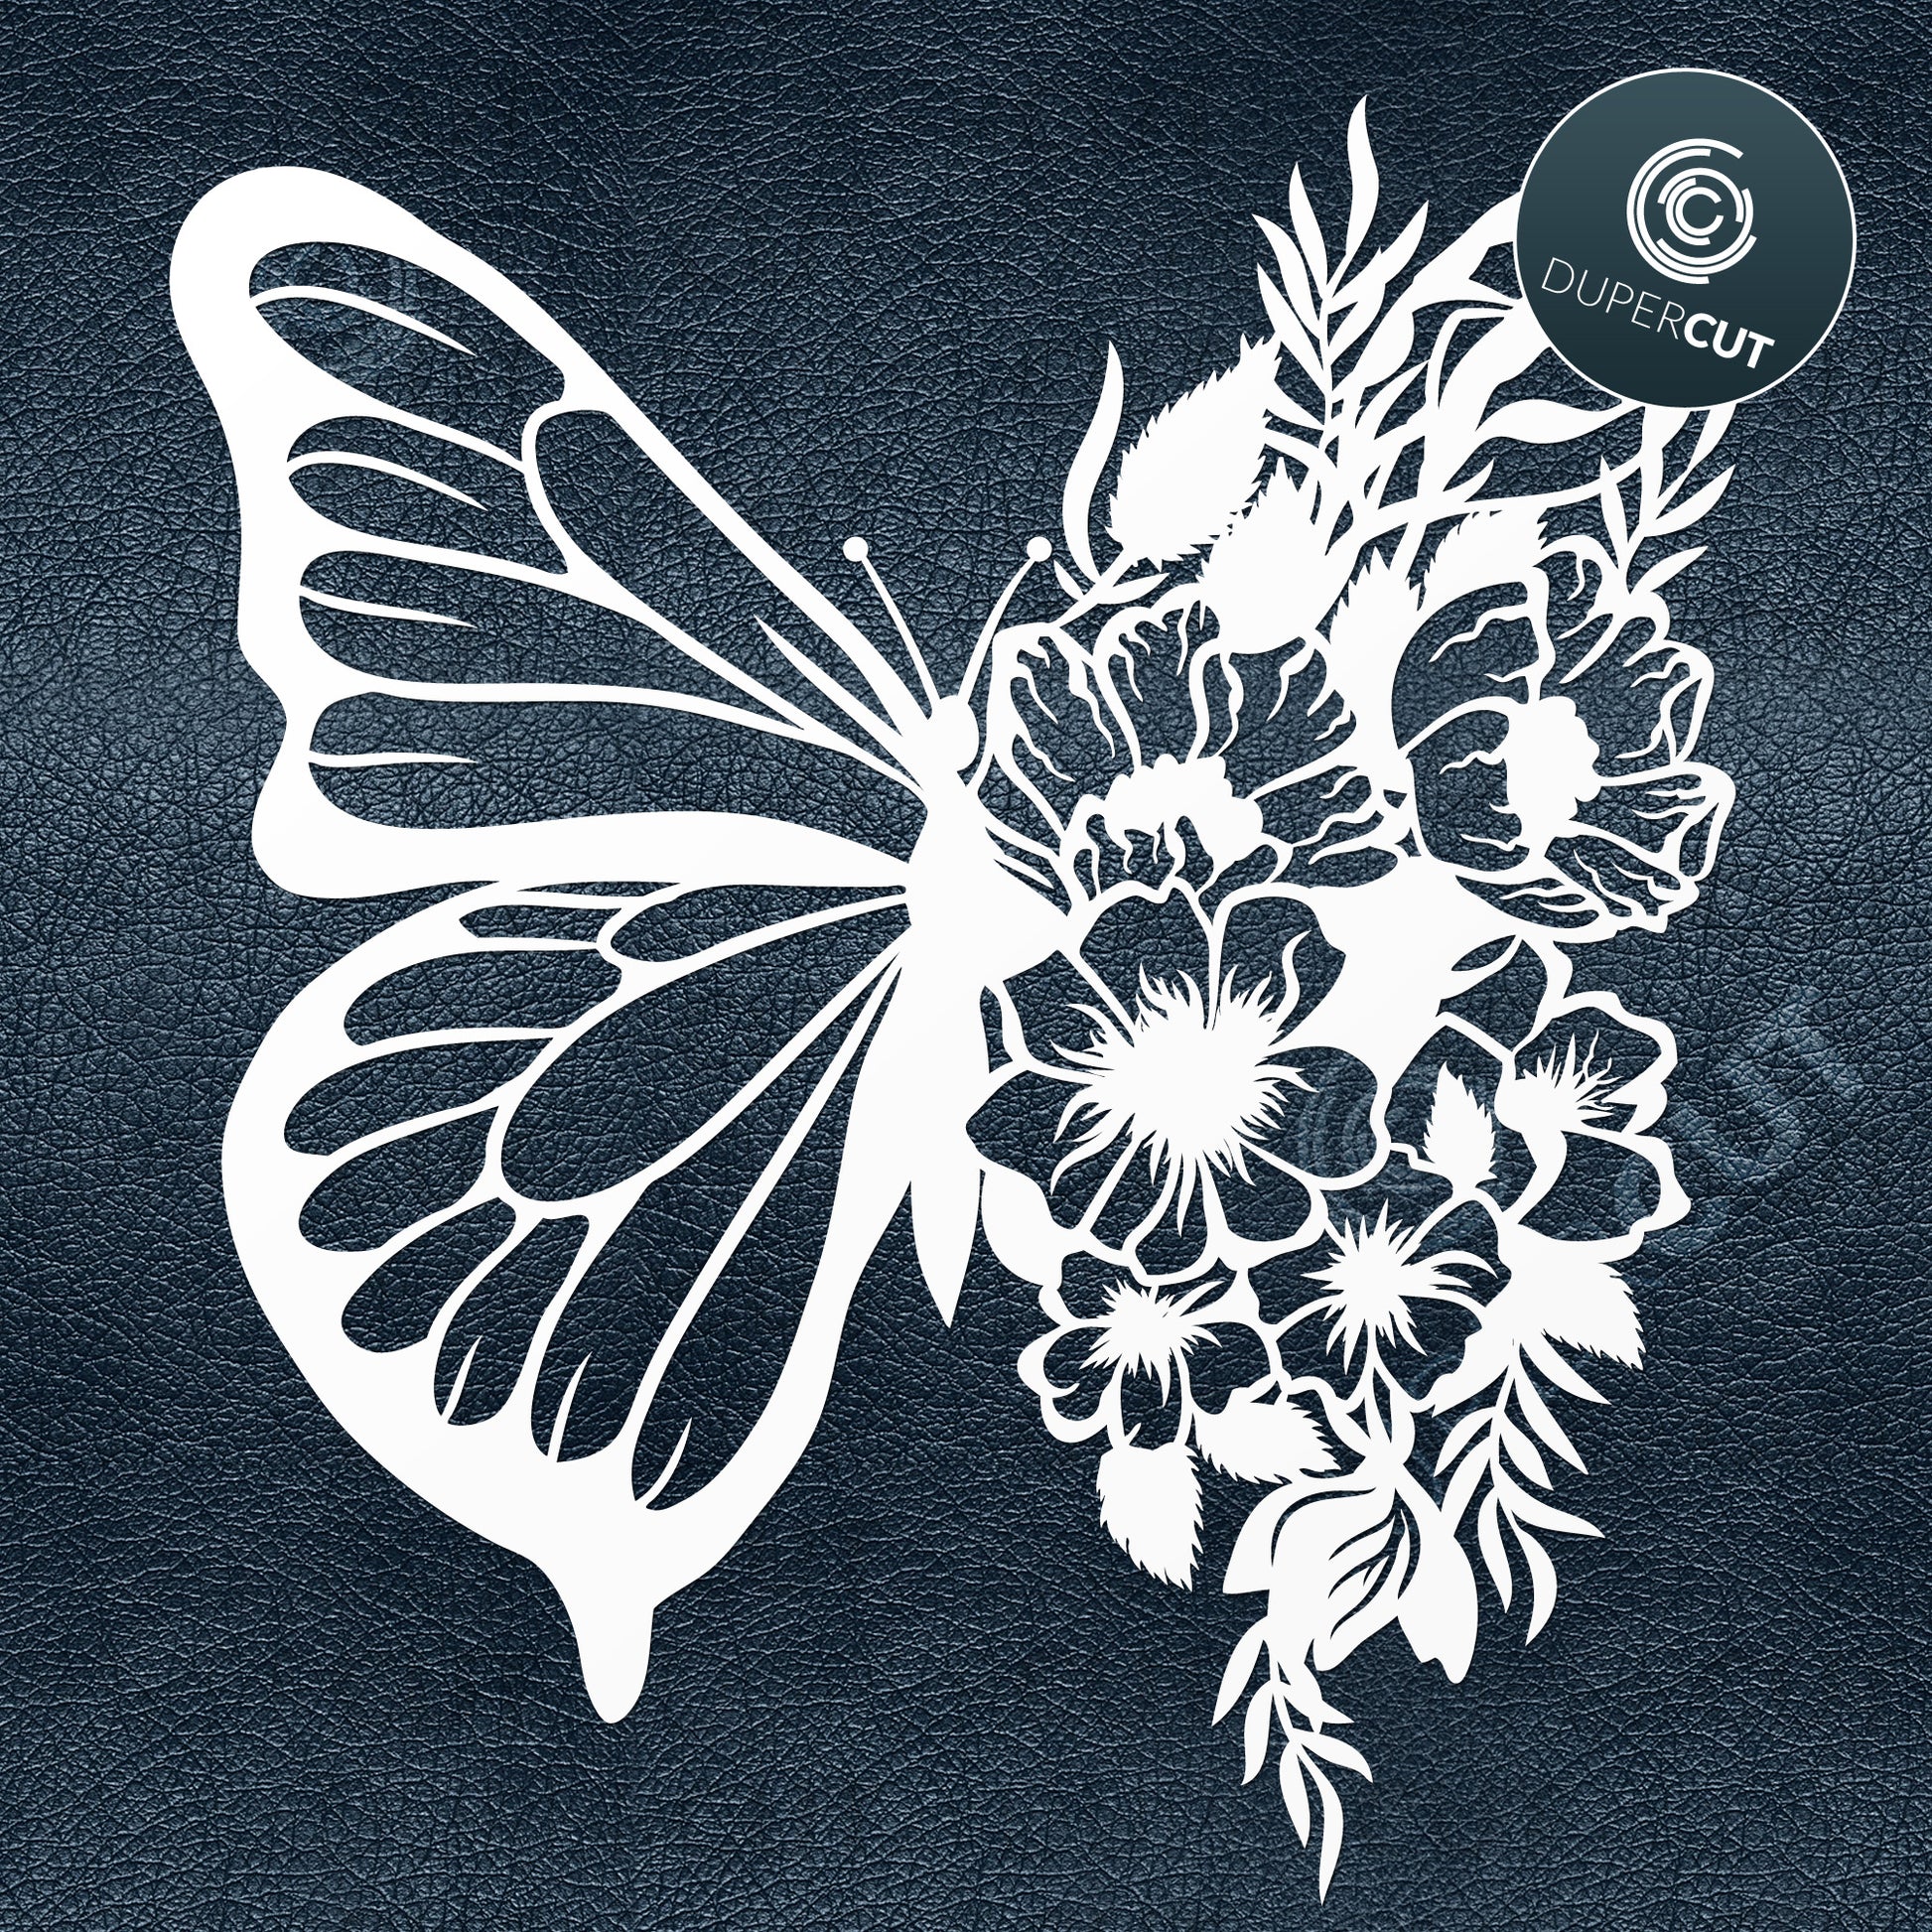 Floral butterfly, half flowers. SVG JPEG DXF files. Template for paper cutting, laser, print on demand. For use with Cricut, Glowforge, Silhouette Cameo, CNC machines. Personal or commercial license.